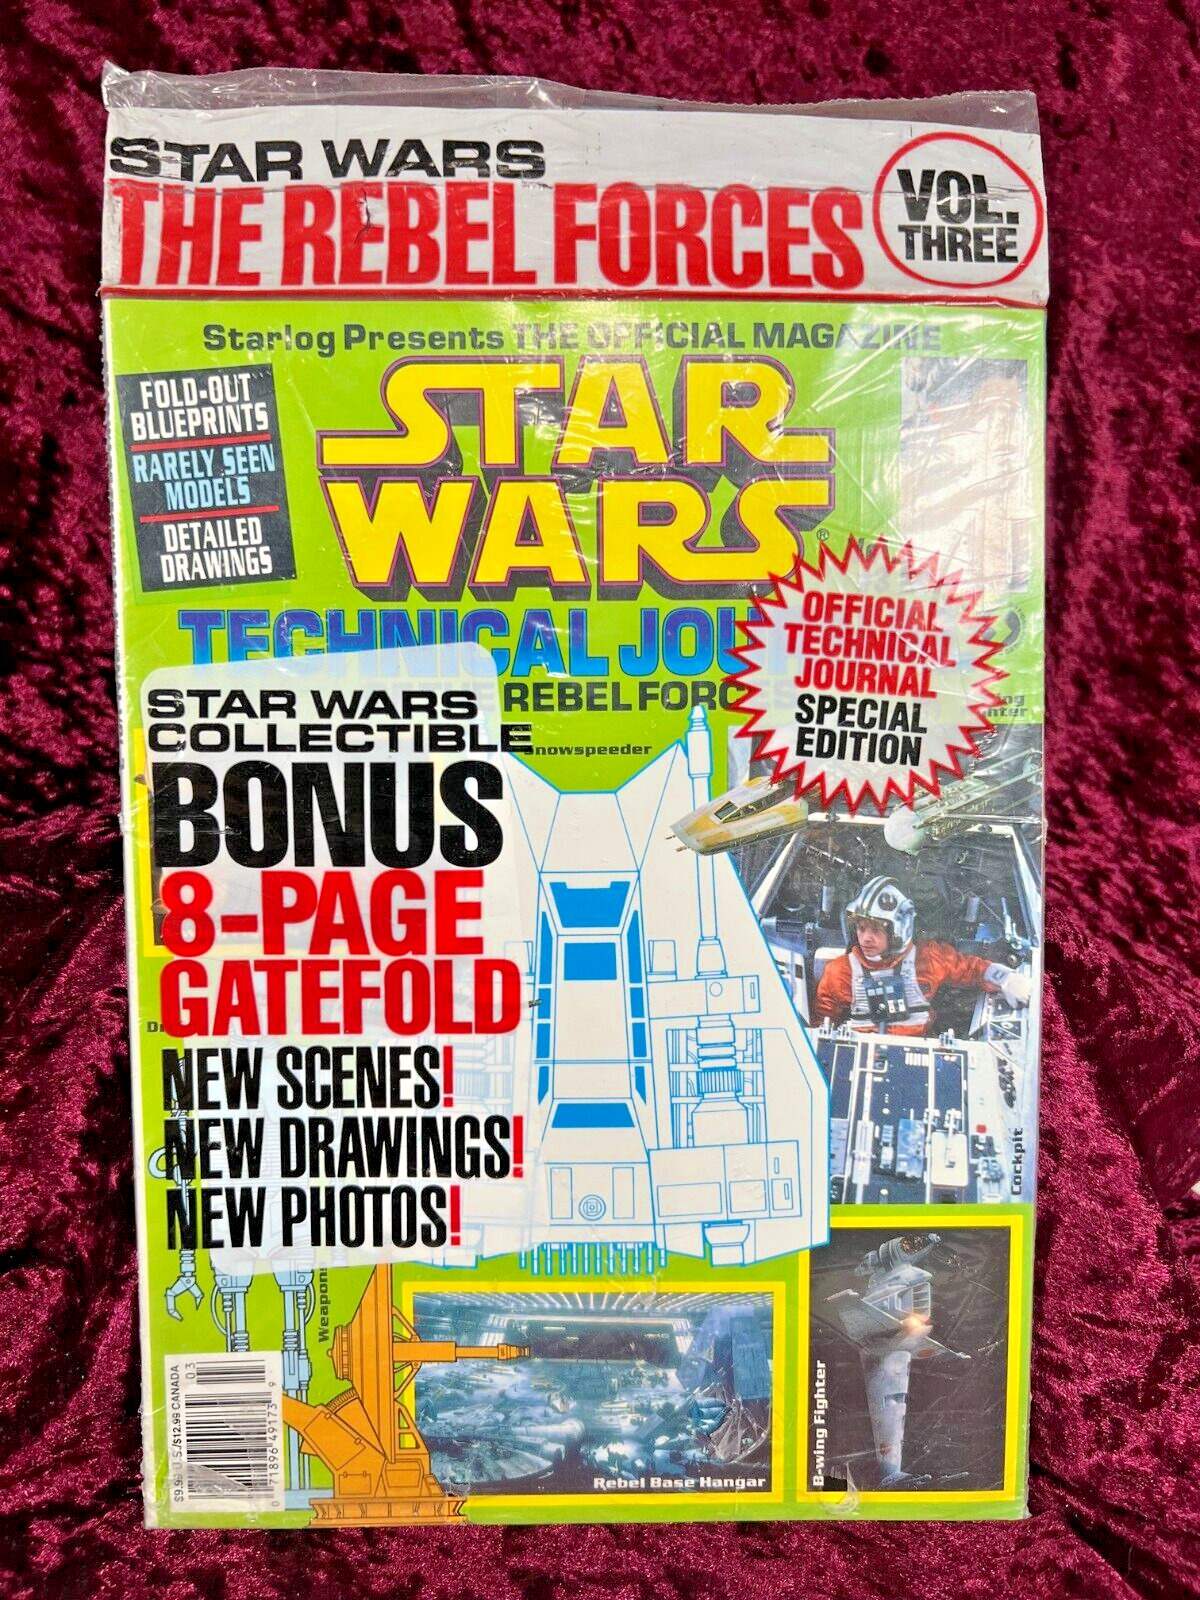 STAR WARS Sealed Technical Journal Vol.3 Starlog Presents The Official Magazine